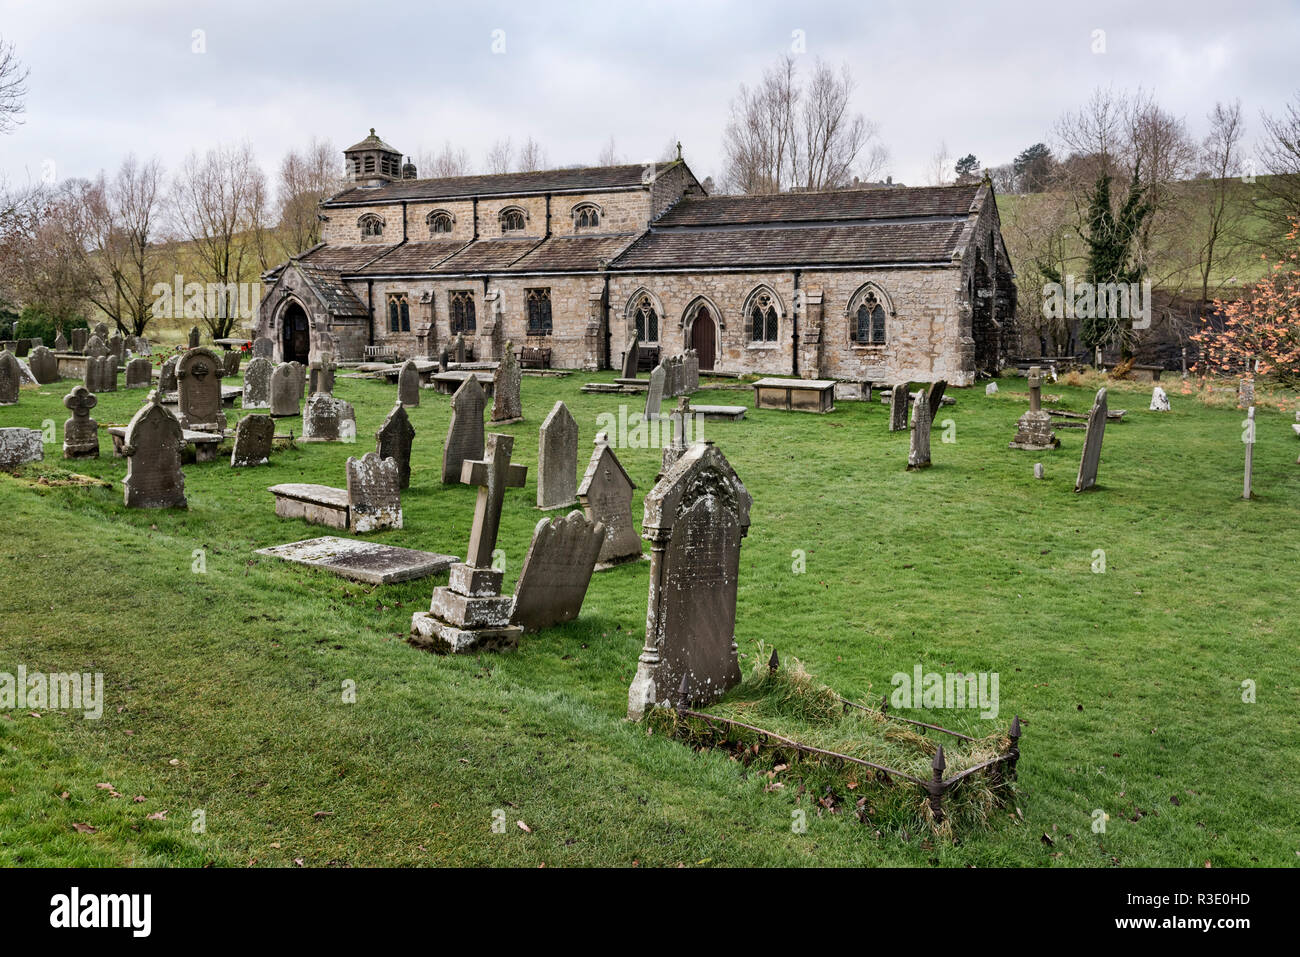 St Michael and All Angels Church, Linton, Grassington, Wharfedale, Yorkshire Dales National Park, UK Stock Photo